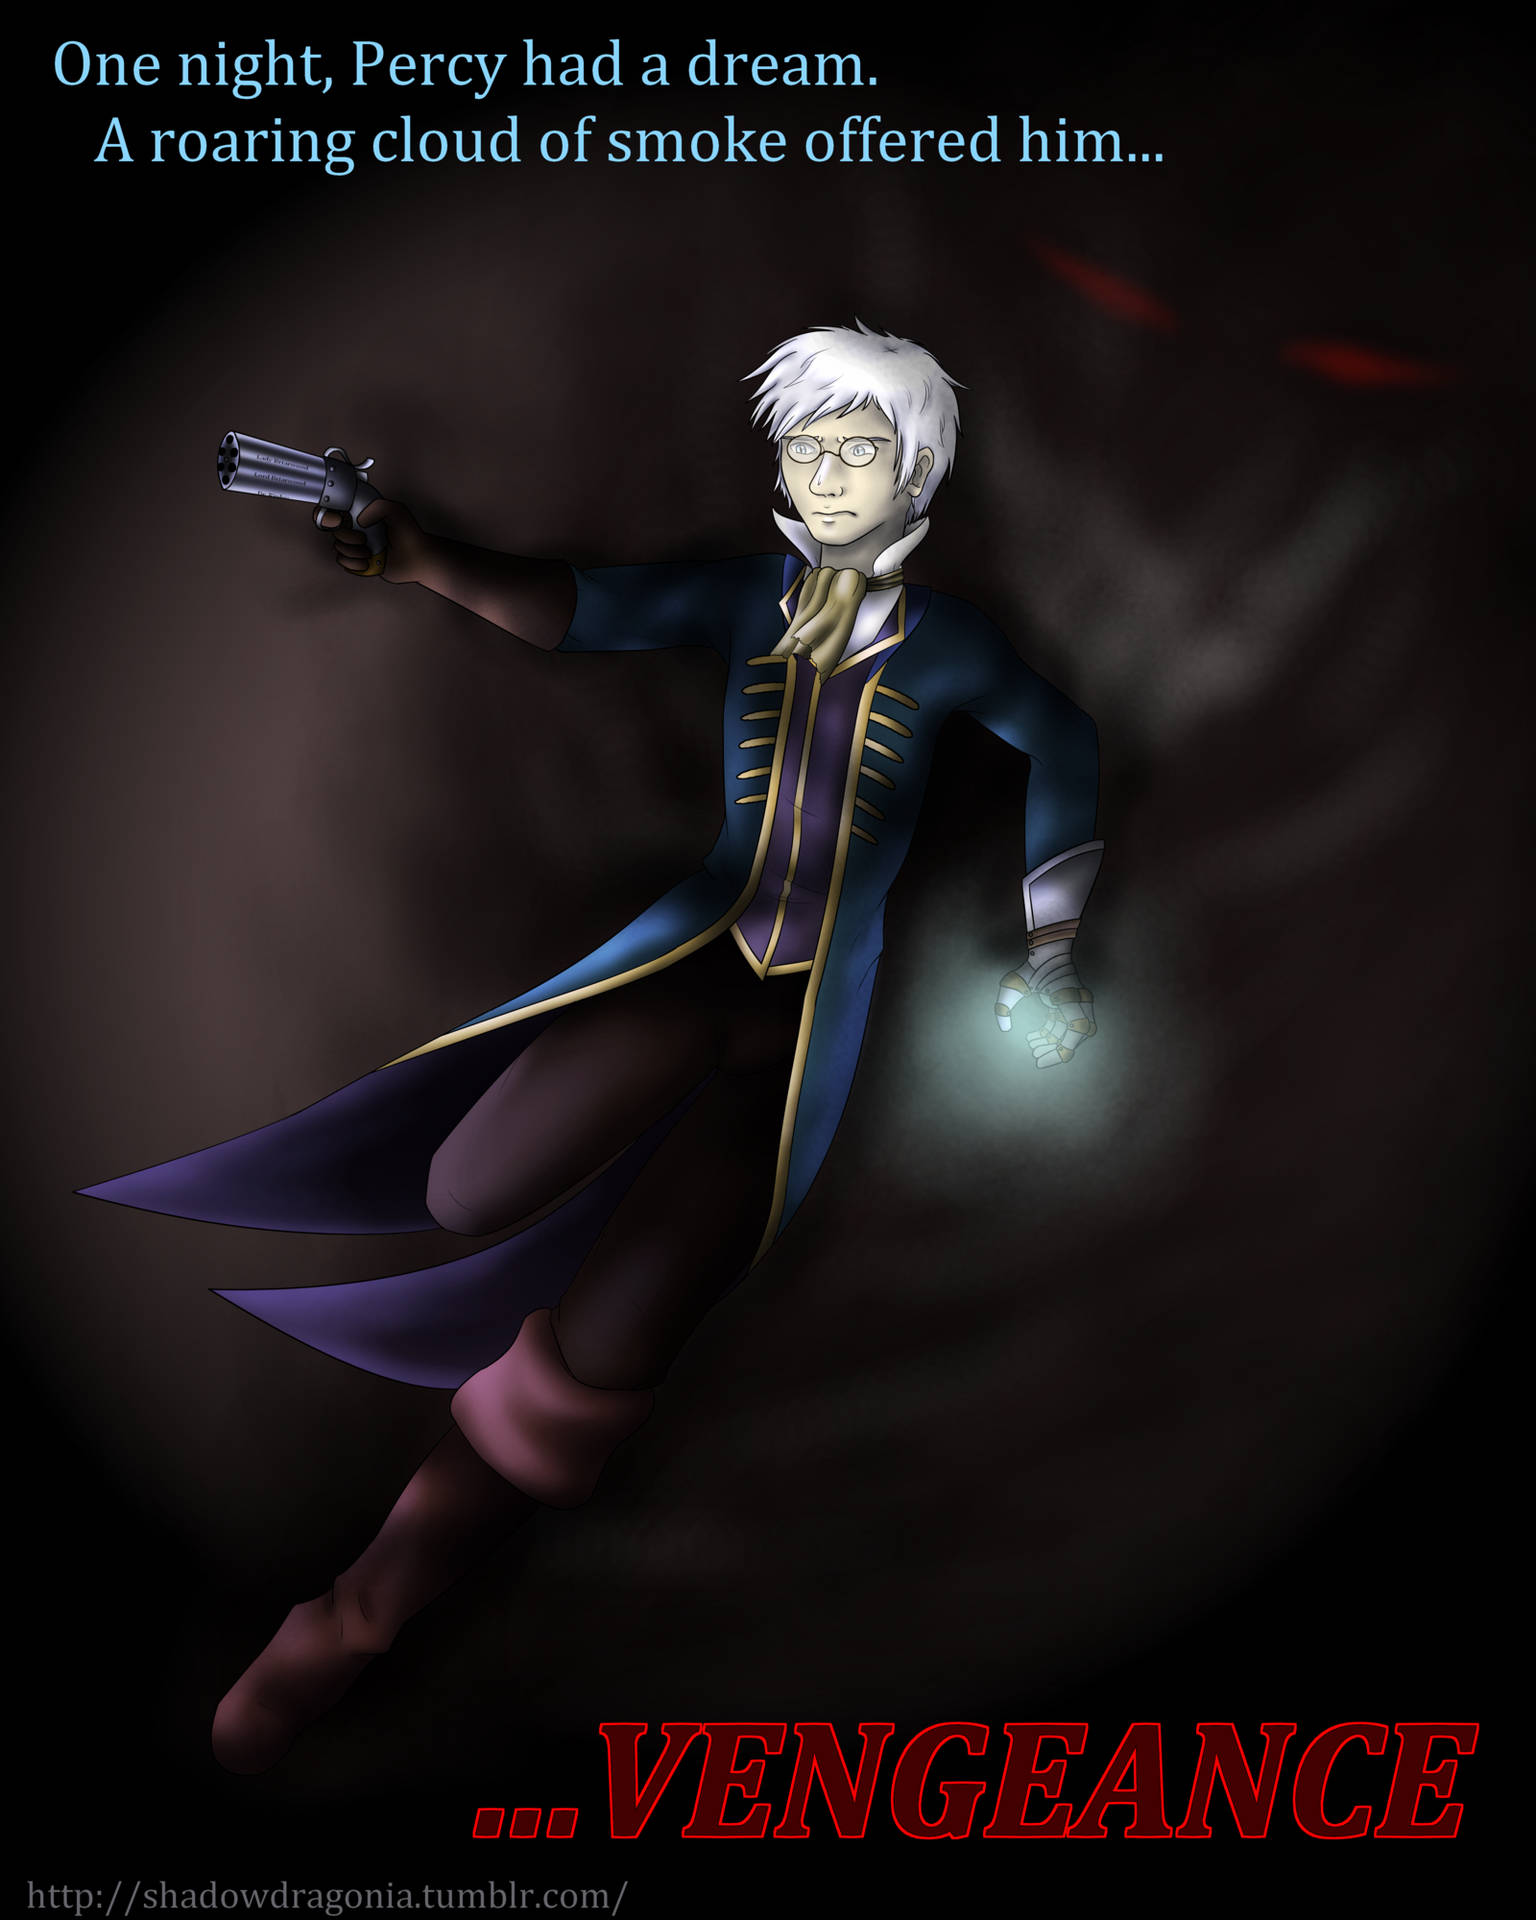 Percy of Critical Role wields his dangerous looking gun-arm Vengeance ready to take on any foe. Wallpaper